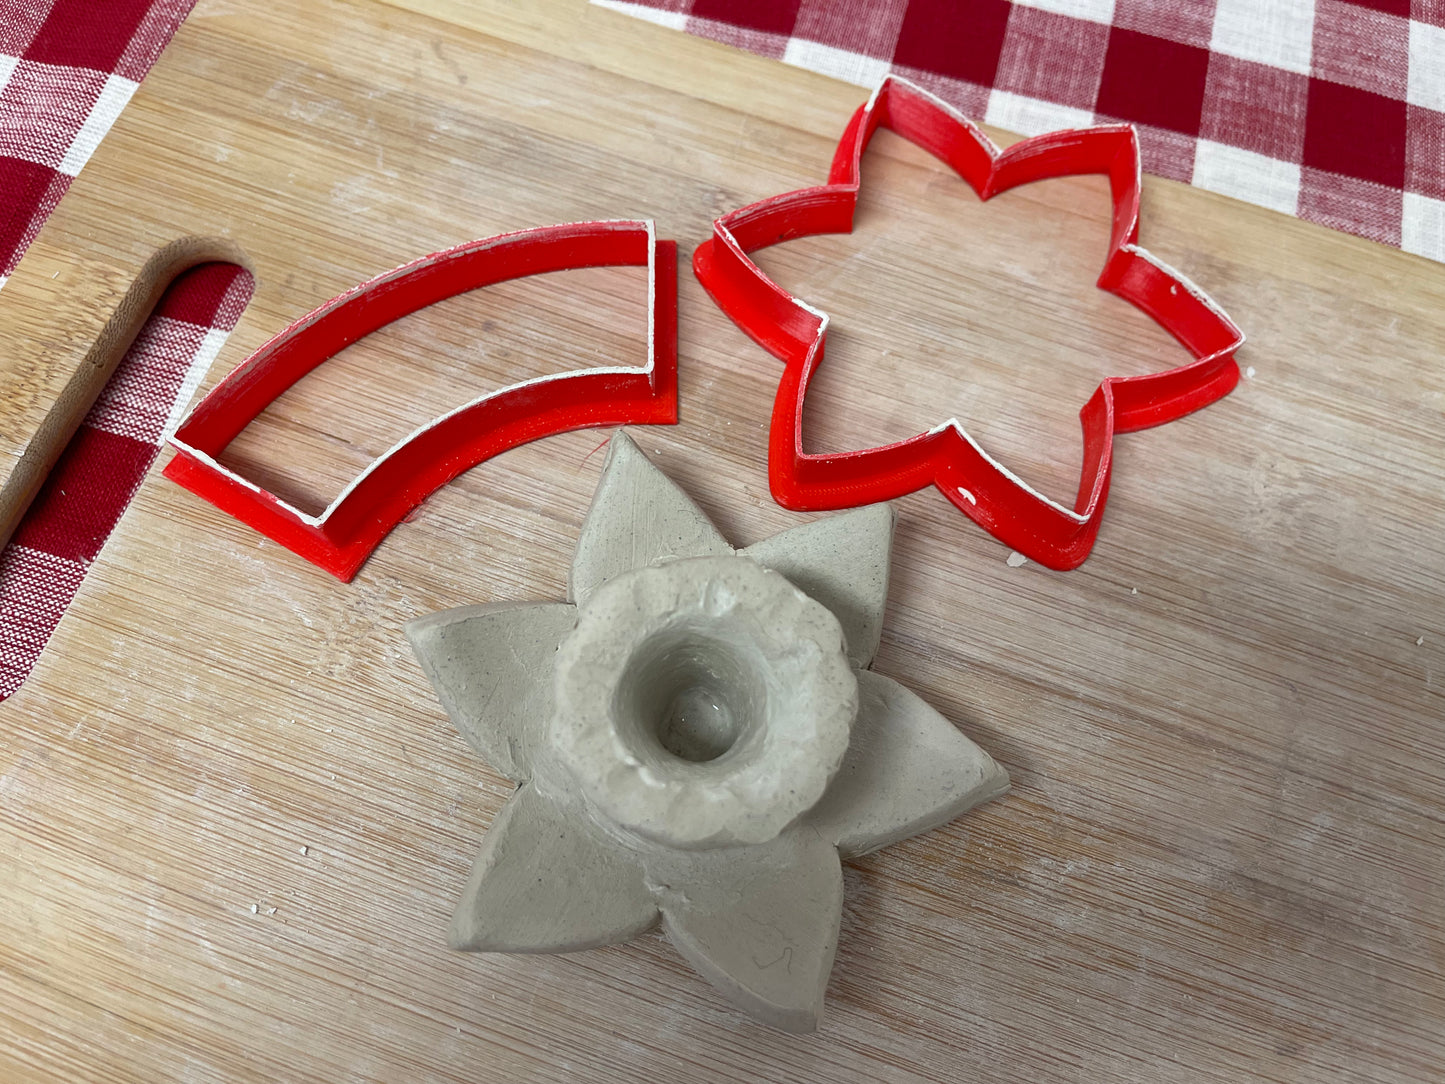 Daffodil Flower 6 Petal Design, Clay Cutter w/ optional Center Cone cutter template - Multiple sizes available